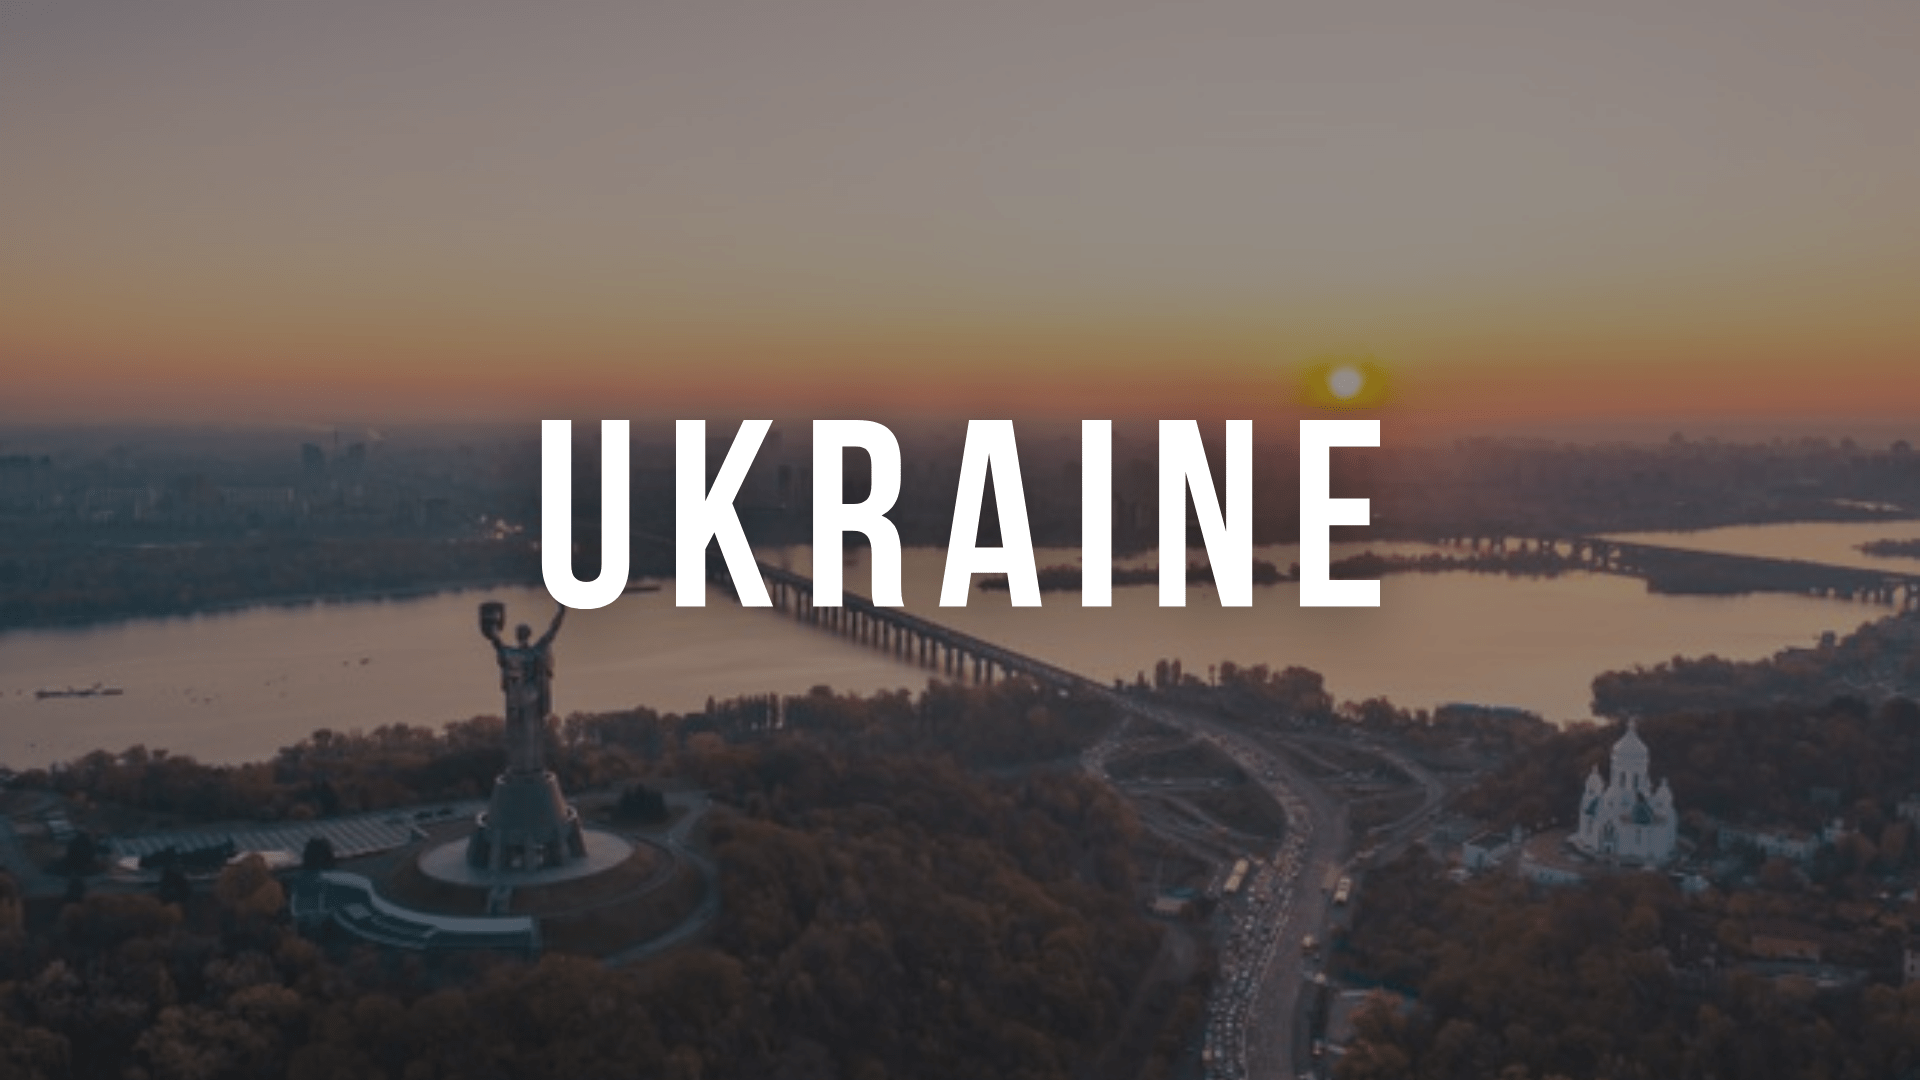 Outsourcing in Ukraine
